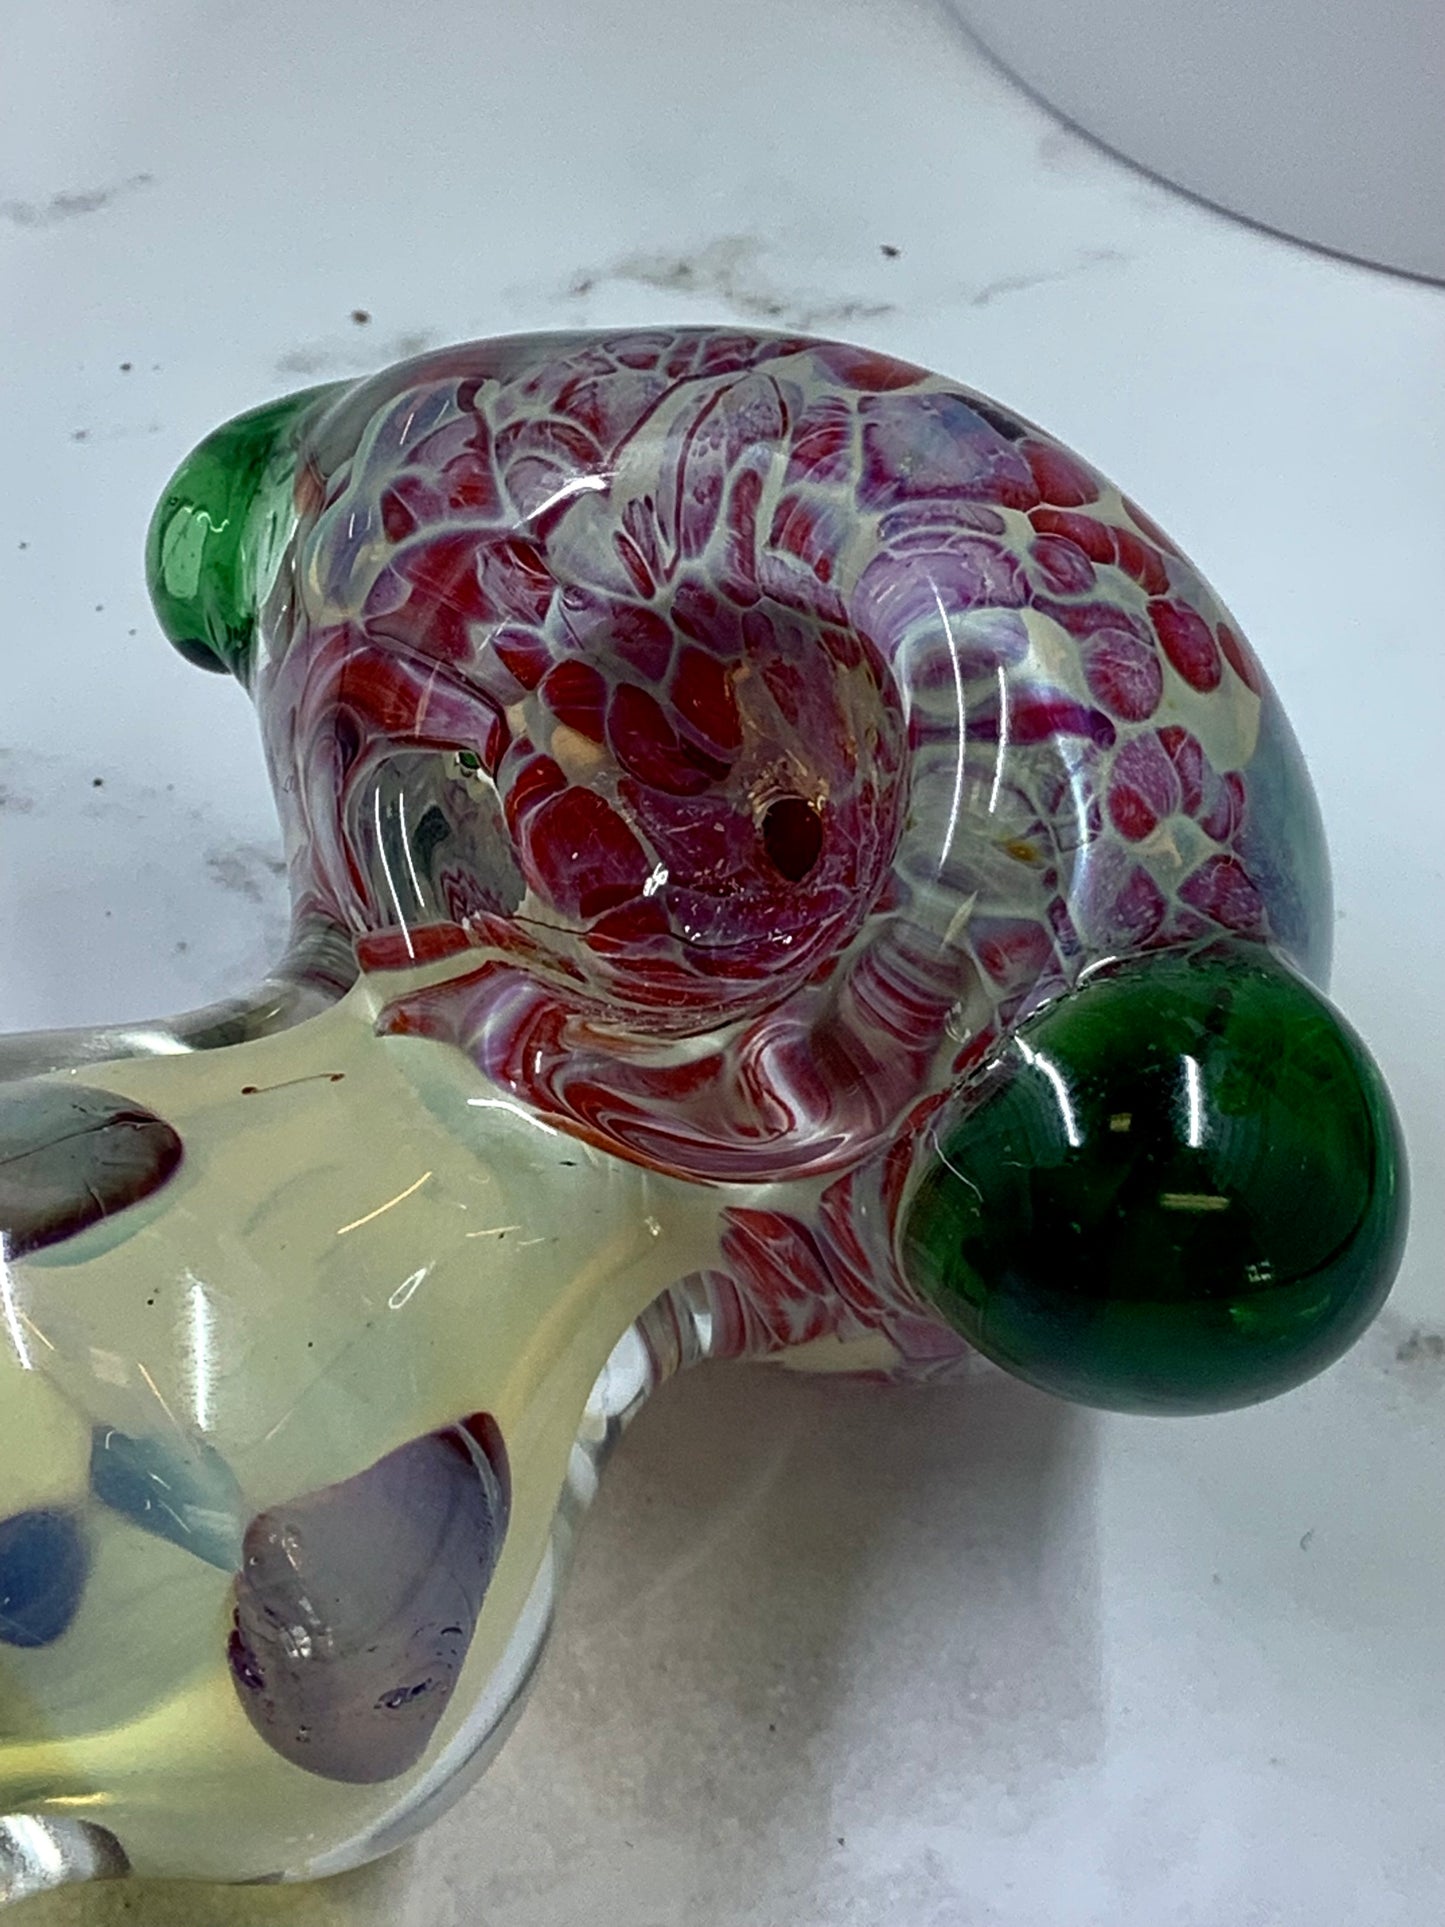 4" Clear W/ Red, Green & White Decorative Accents In Glass Double Walled Bowl W/ Green Carb & Green Grip yoga smokes smoke shop, dispensary, local dispensary, smokeshop near me, port st lucie smoke shop, smoke shop in port st lucie, smoke shop in port saint lucie, smoke shop in florida, Yoga Smokes